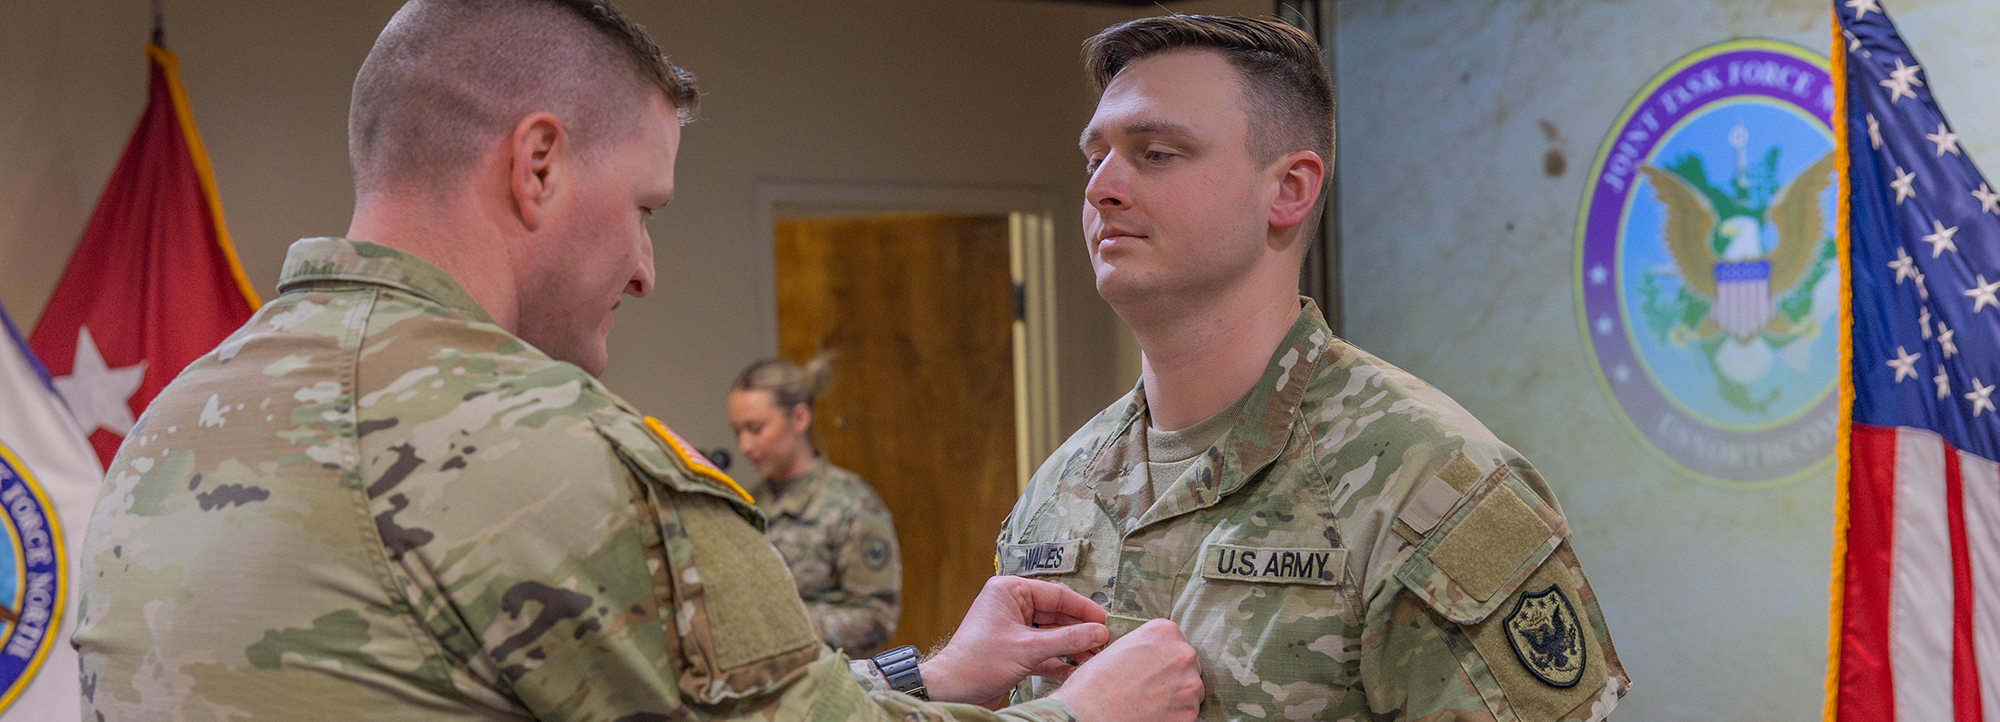 Joseph Wales Promoted to Staff Sergeant